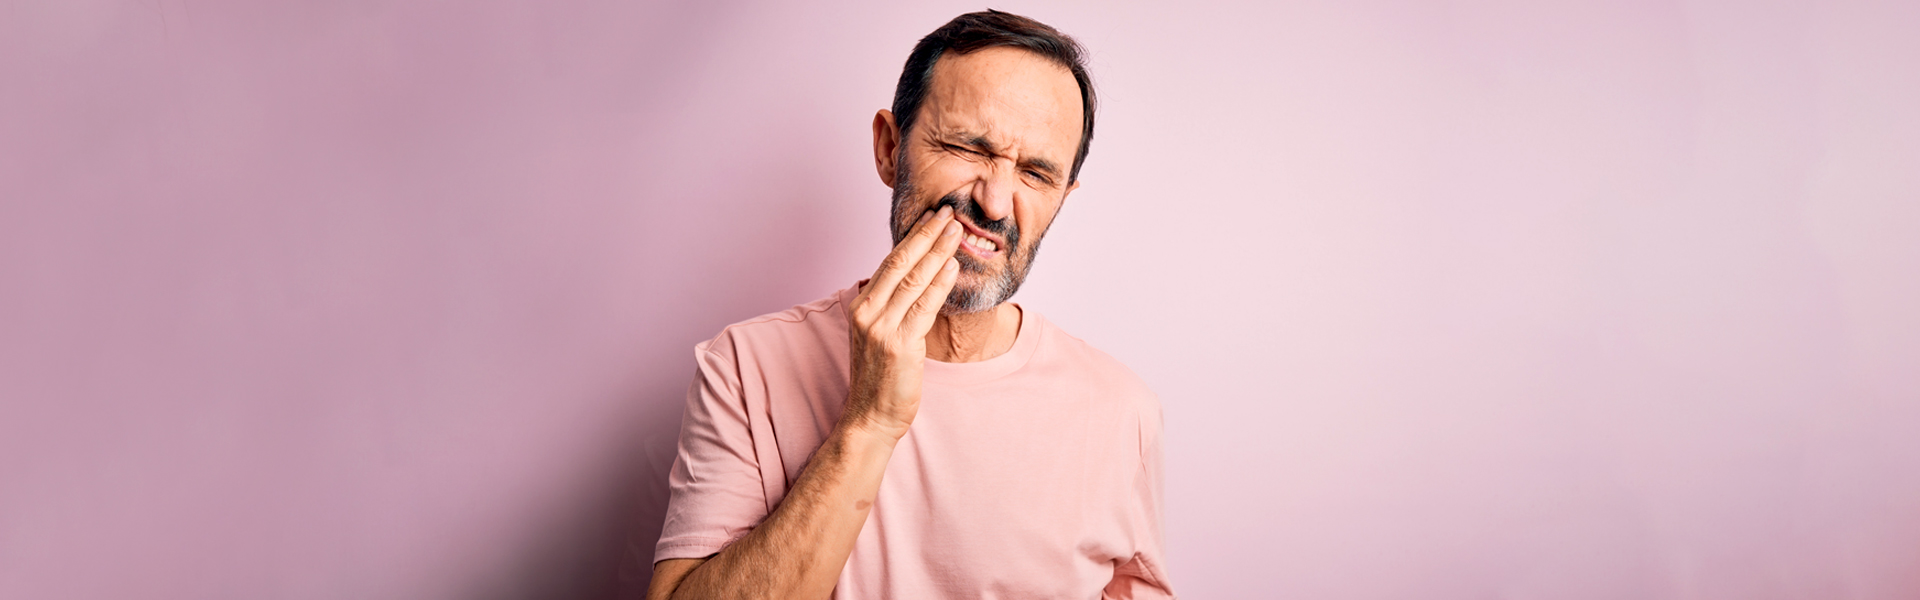 Treatment for Toothaches and Tooth Pain in Spring and Richmond, TX